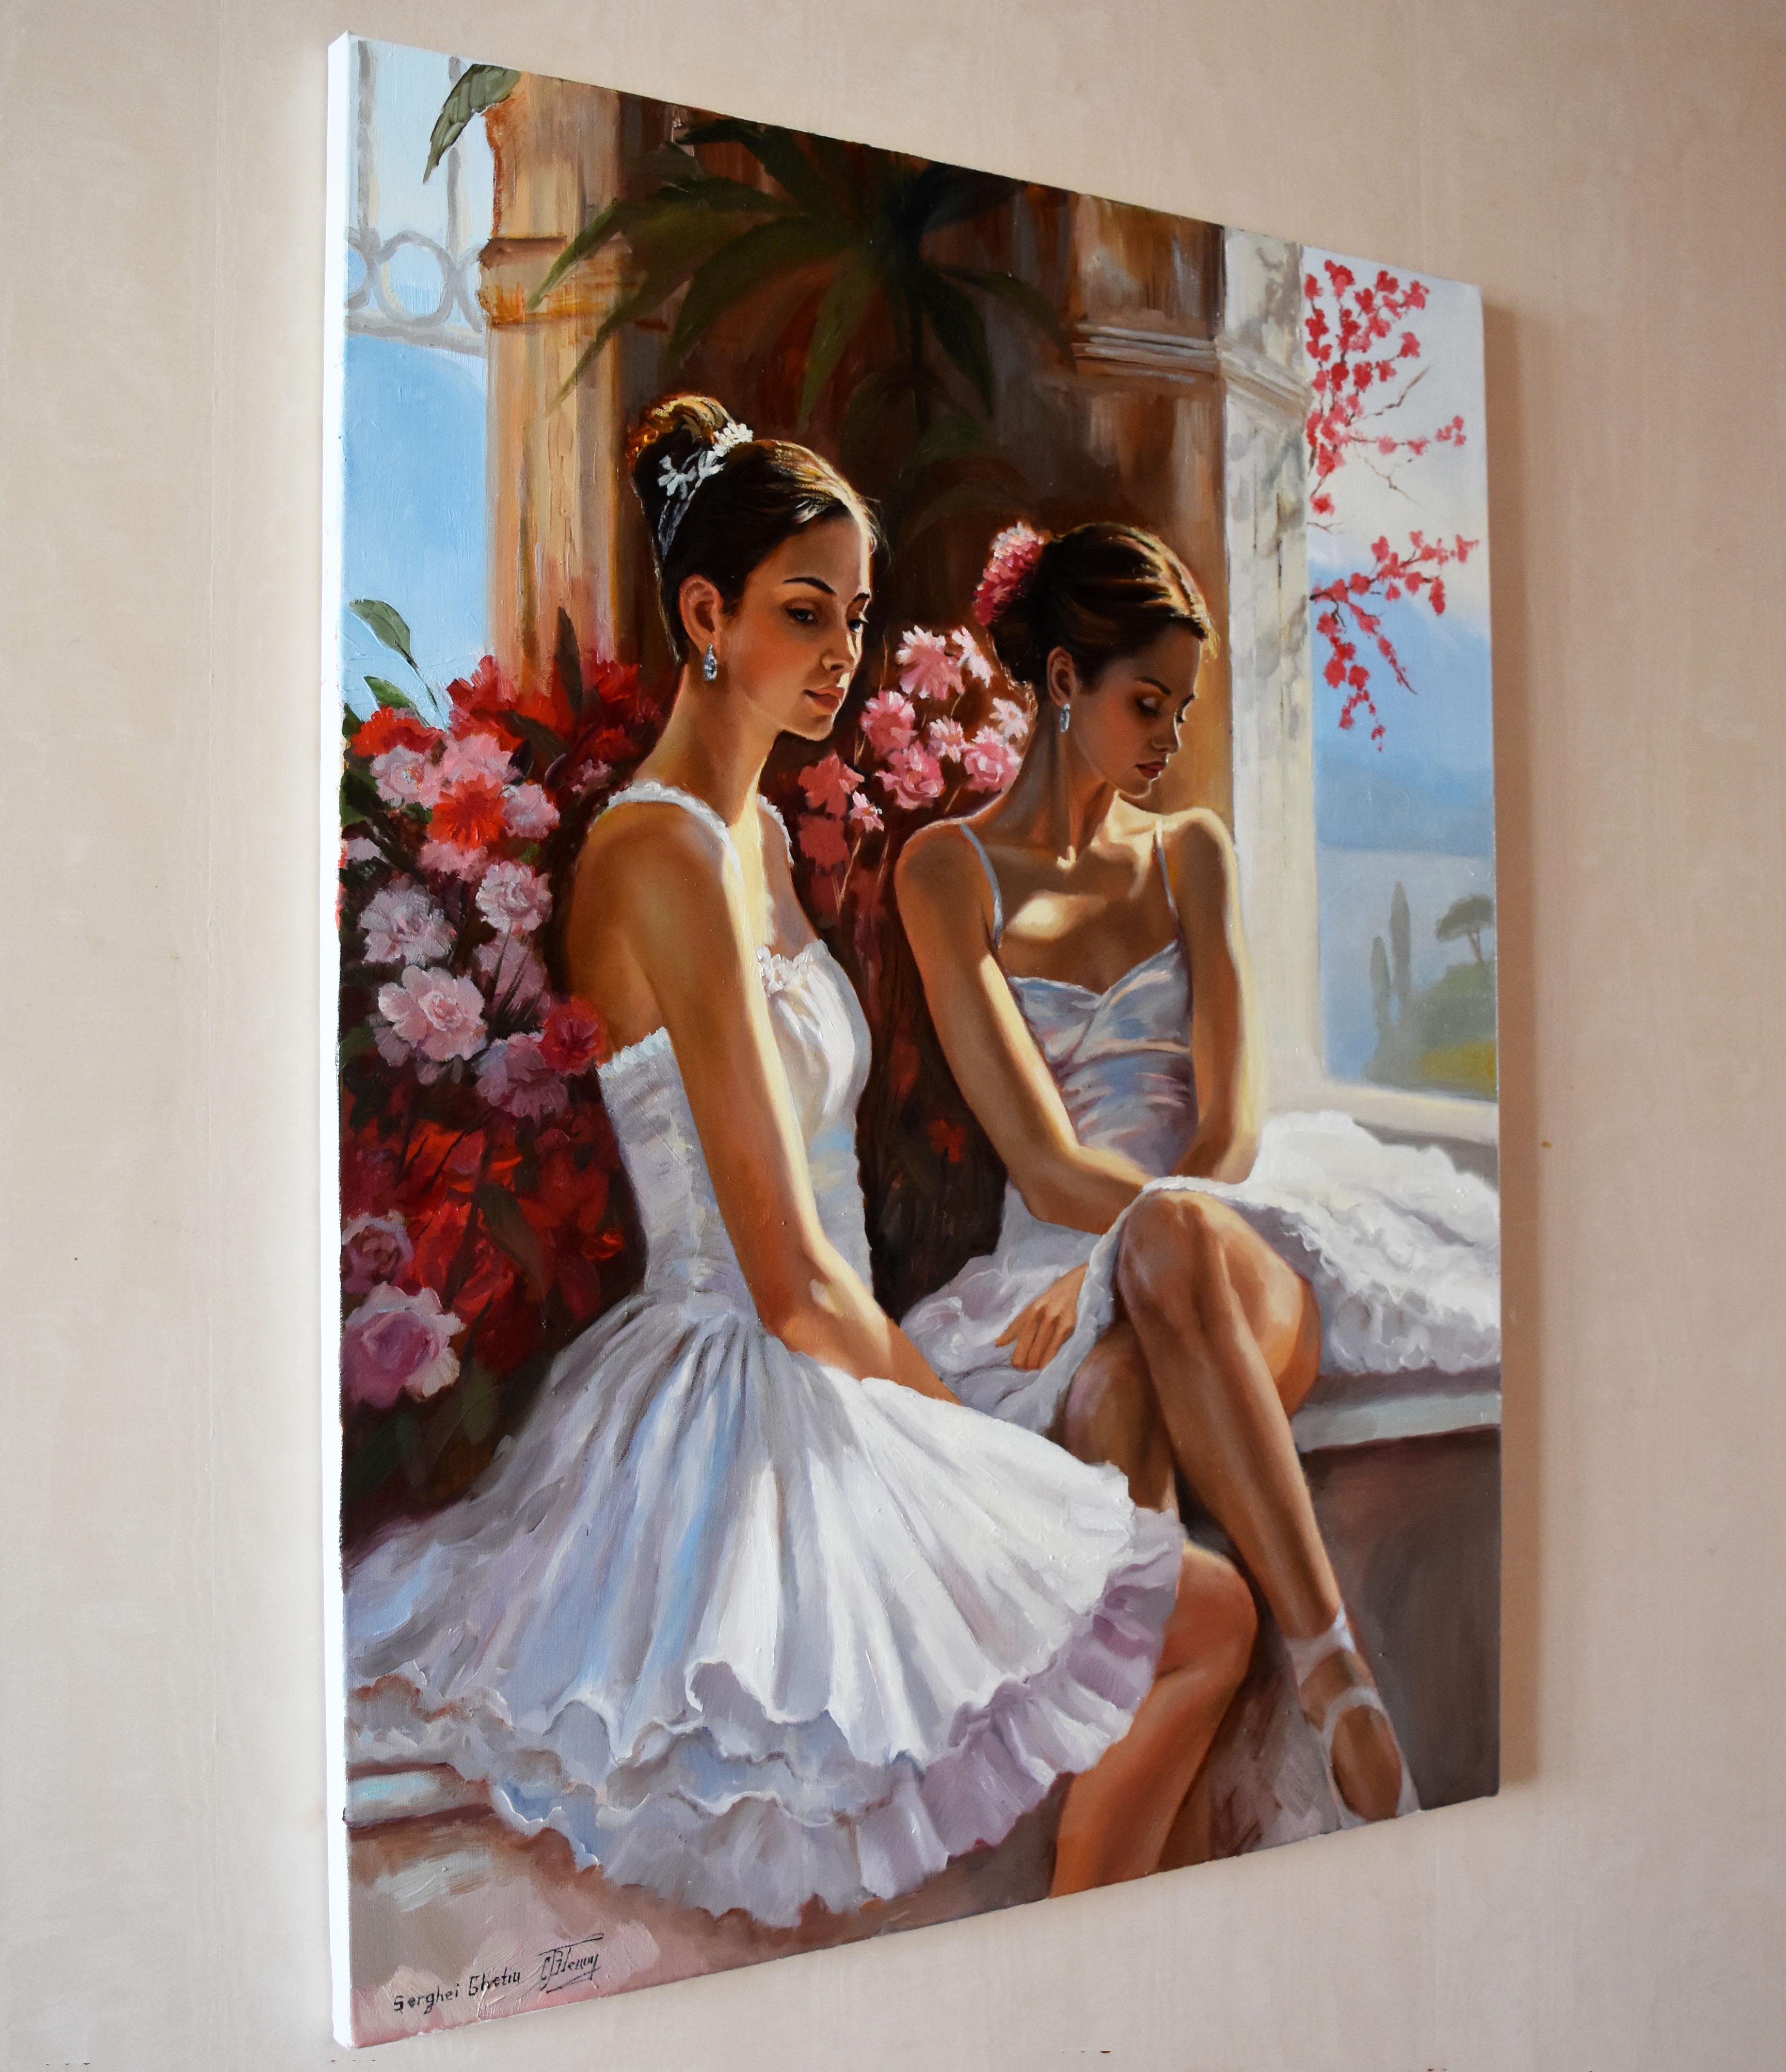 This is a continuation of the ballet topic. In creating this piece, I immersed myself in the ethereal grace of ballet. 

I used oil to capture the delicate interplay of light and shadow, emphasizing the dancers' harmonious connection. Their poised